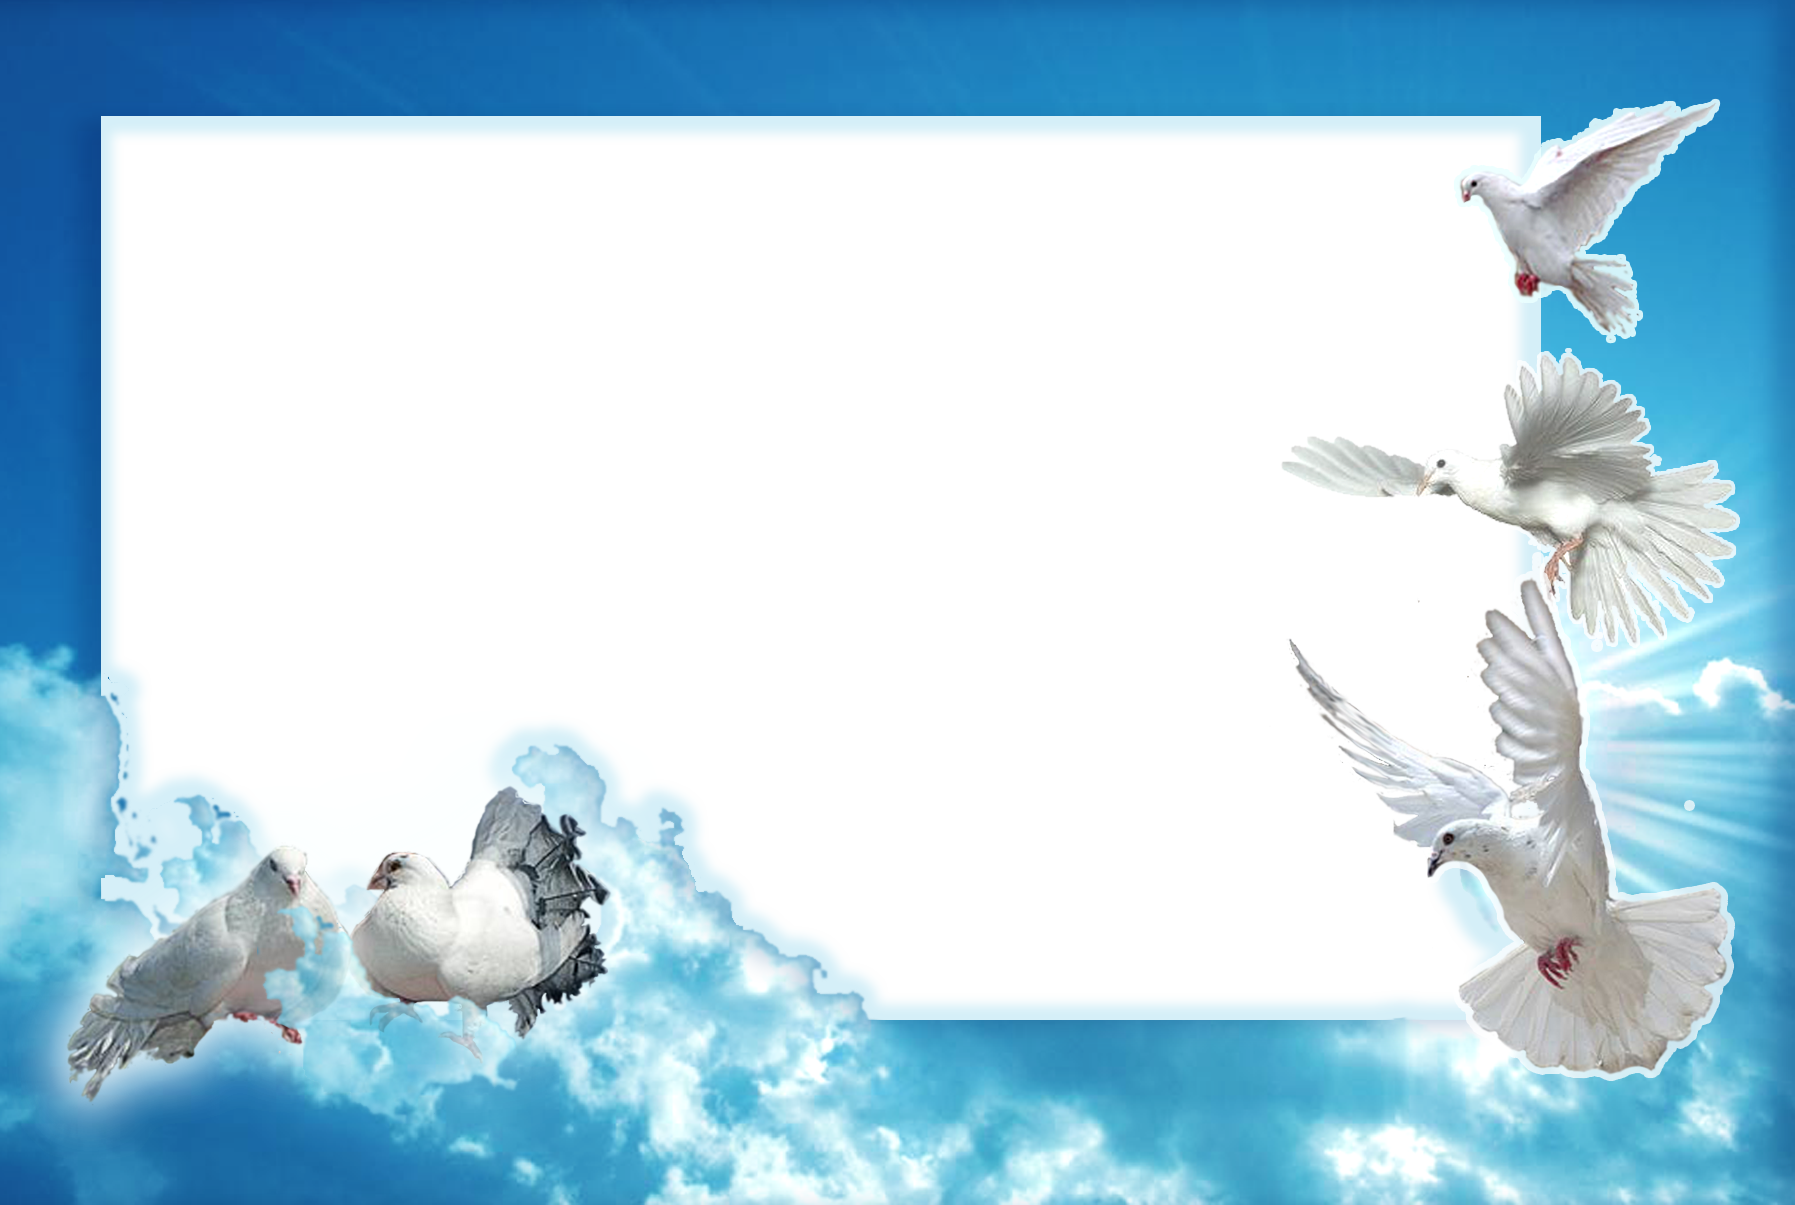 Cloud Frame Wallpapers High Quality | Download Free